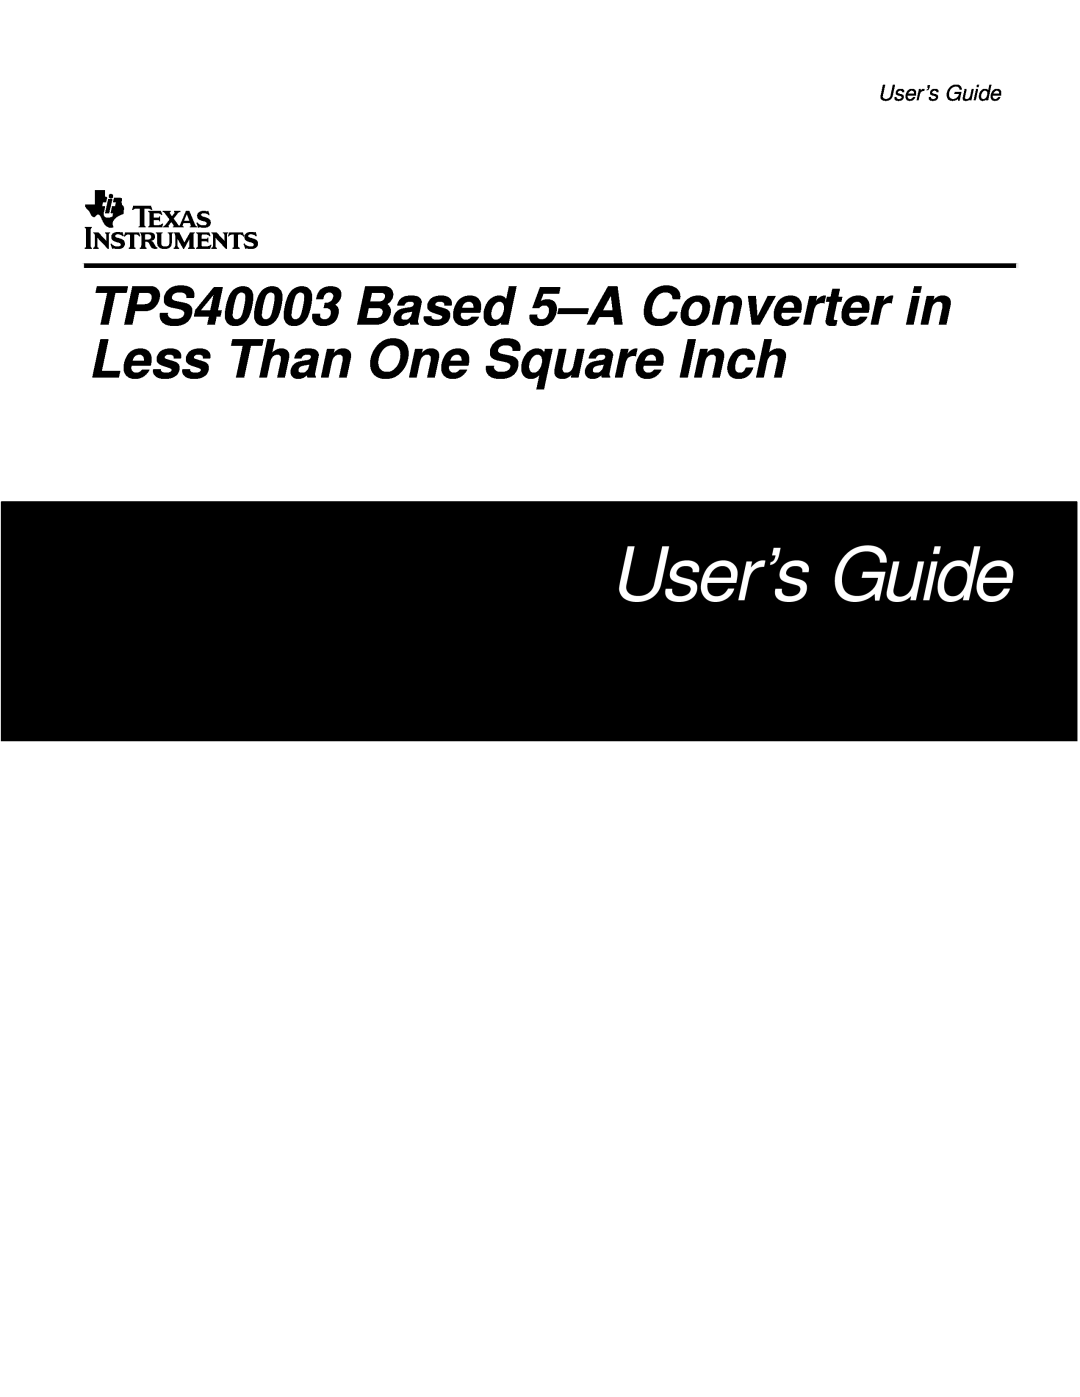 Texas Instruments manual User’s Guide, TPS40003 Based 5-A Converter in Less Than One Square Inch 